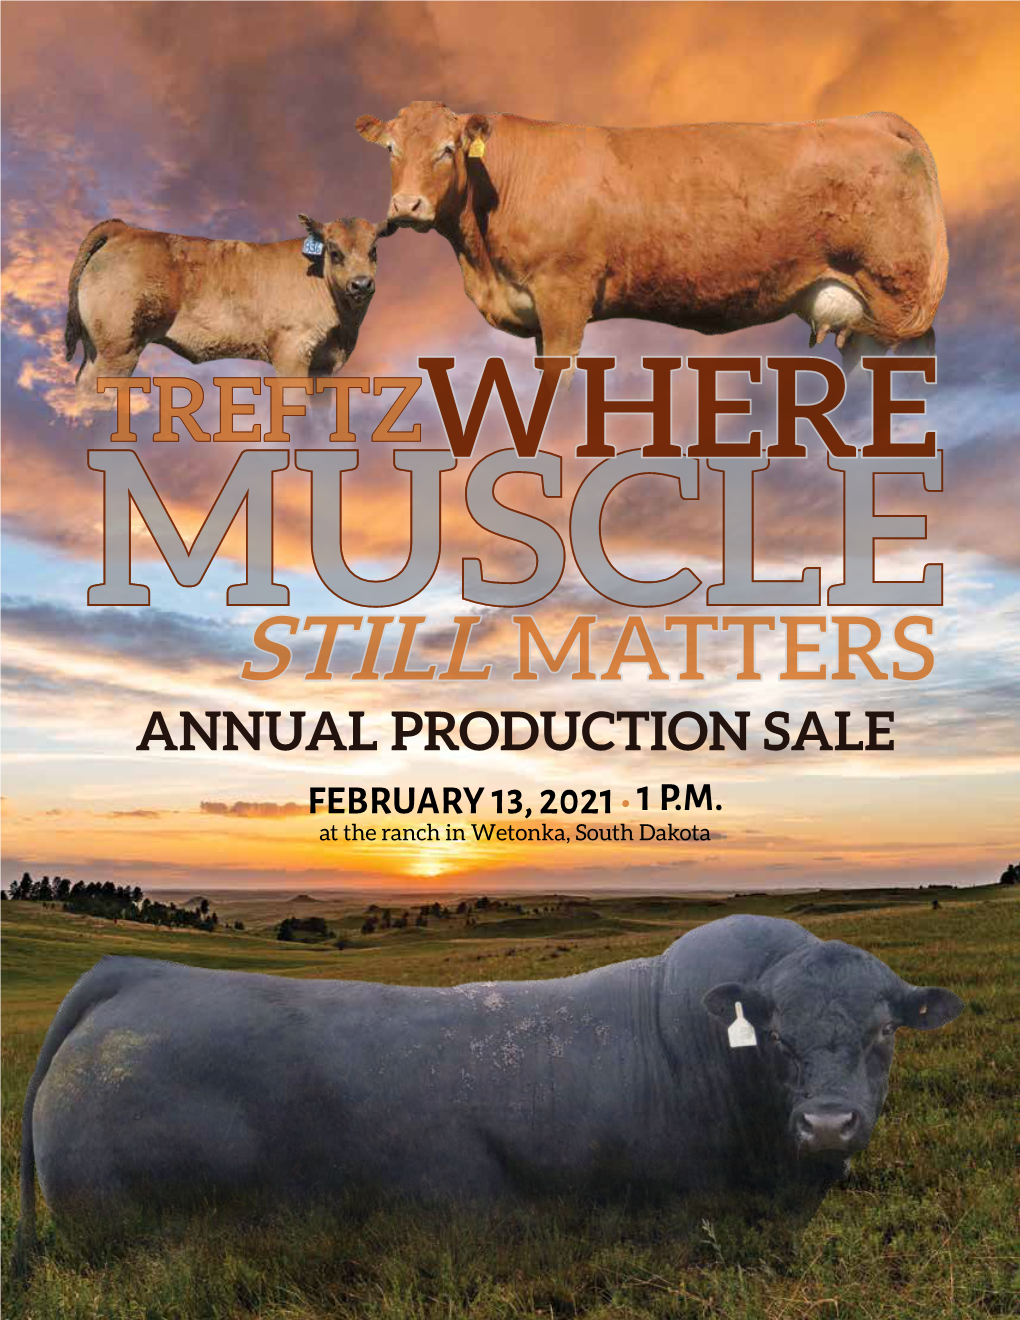 Annual Production Sale February 13, 2021 • 1 P